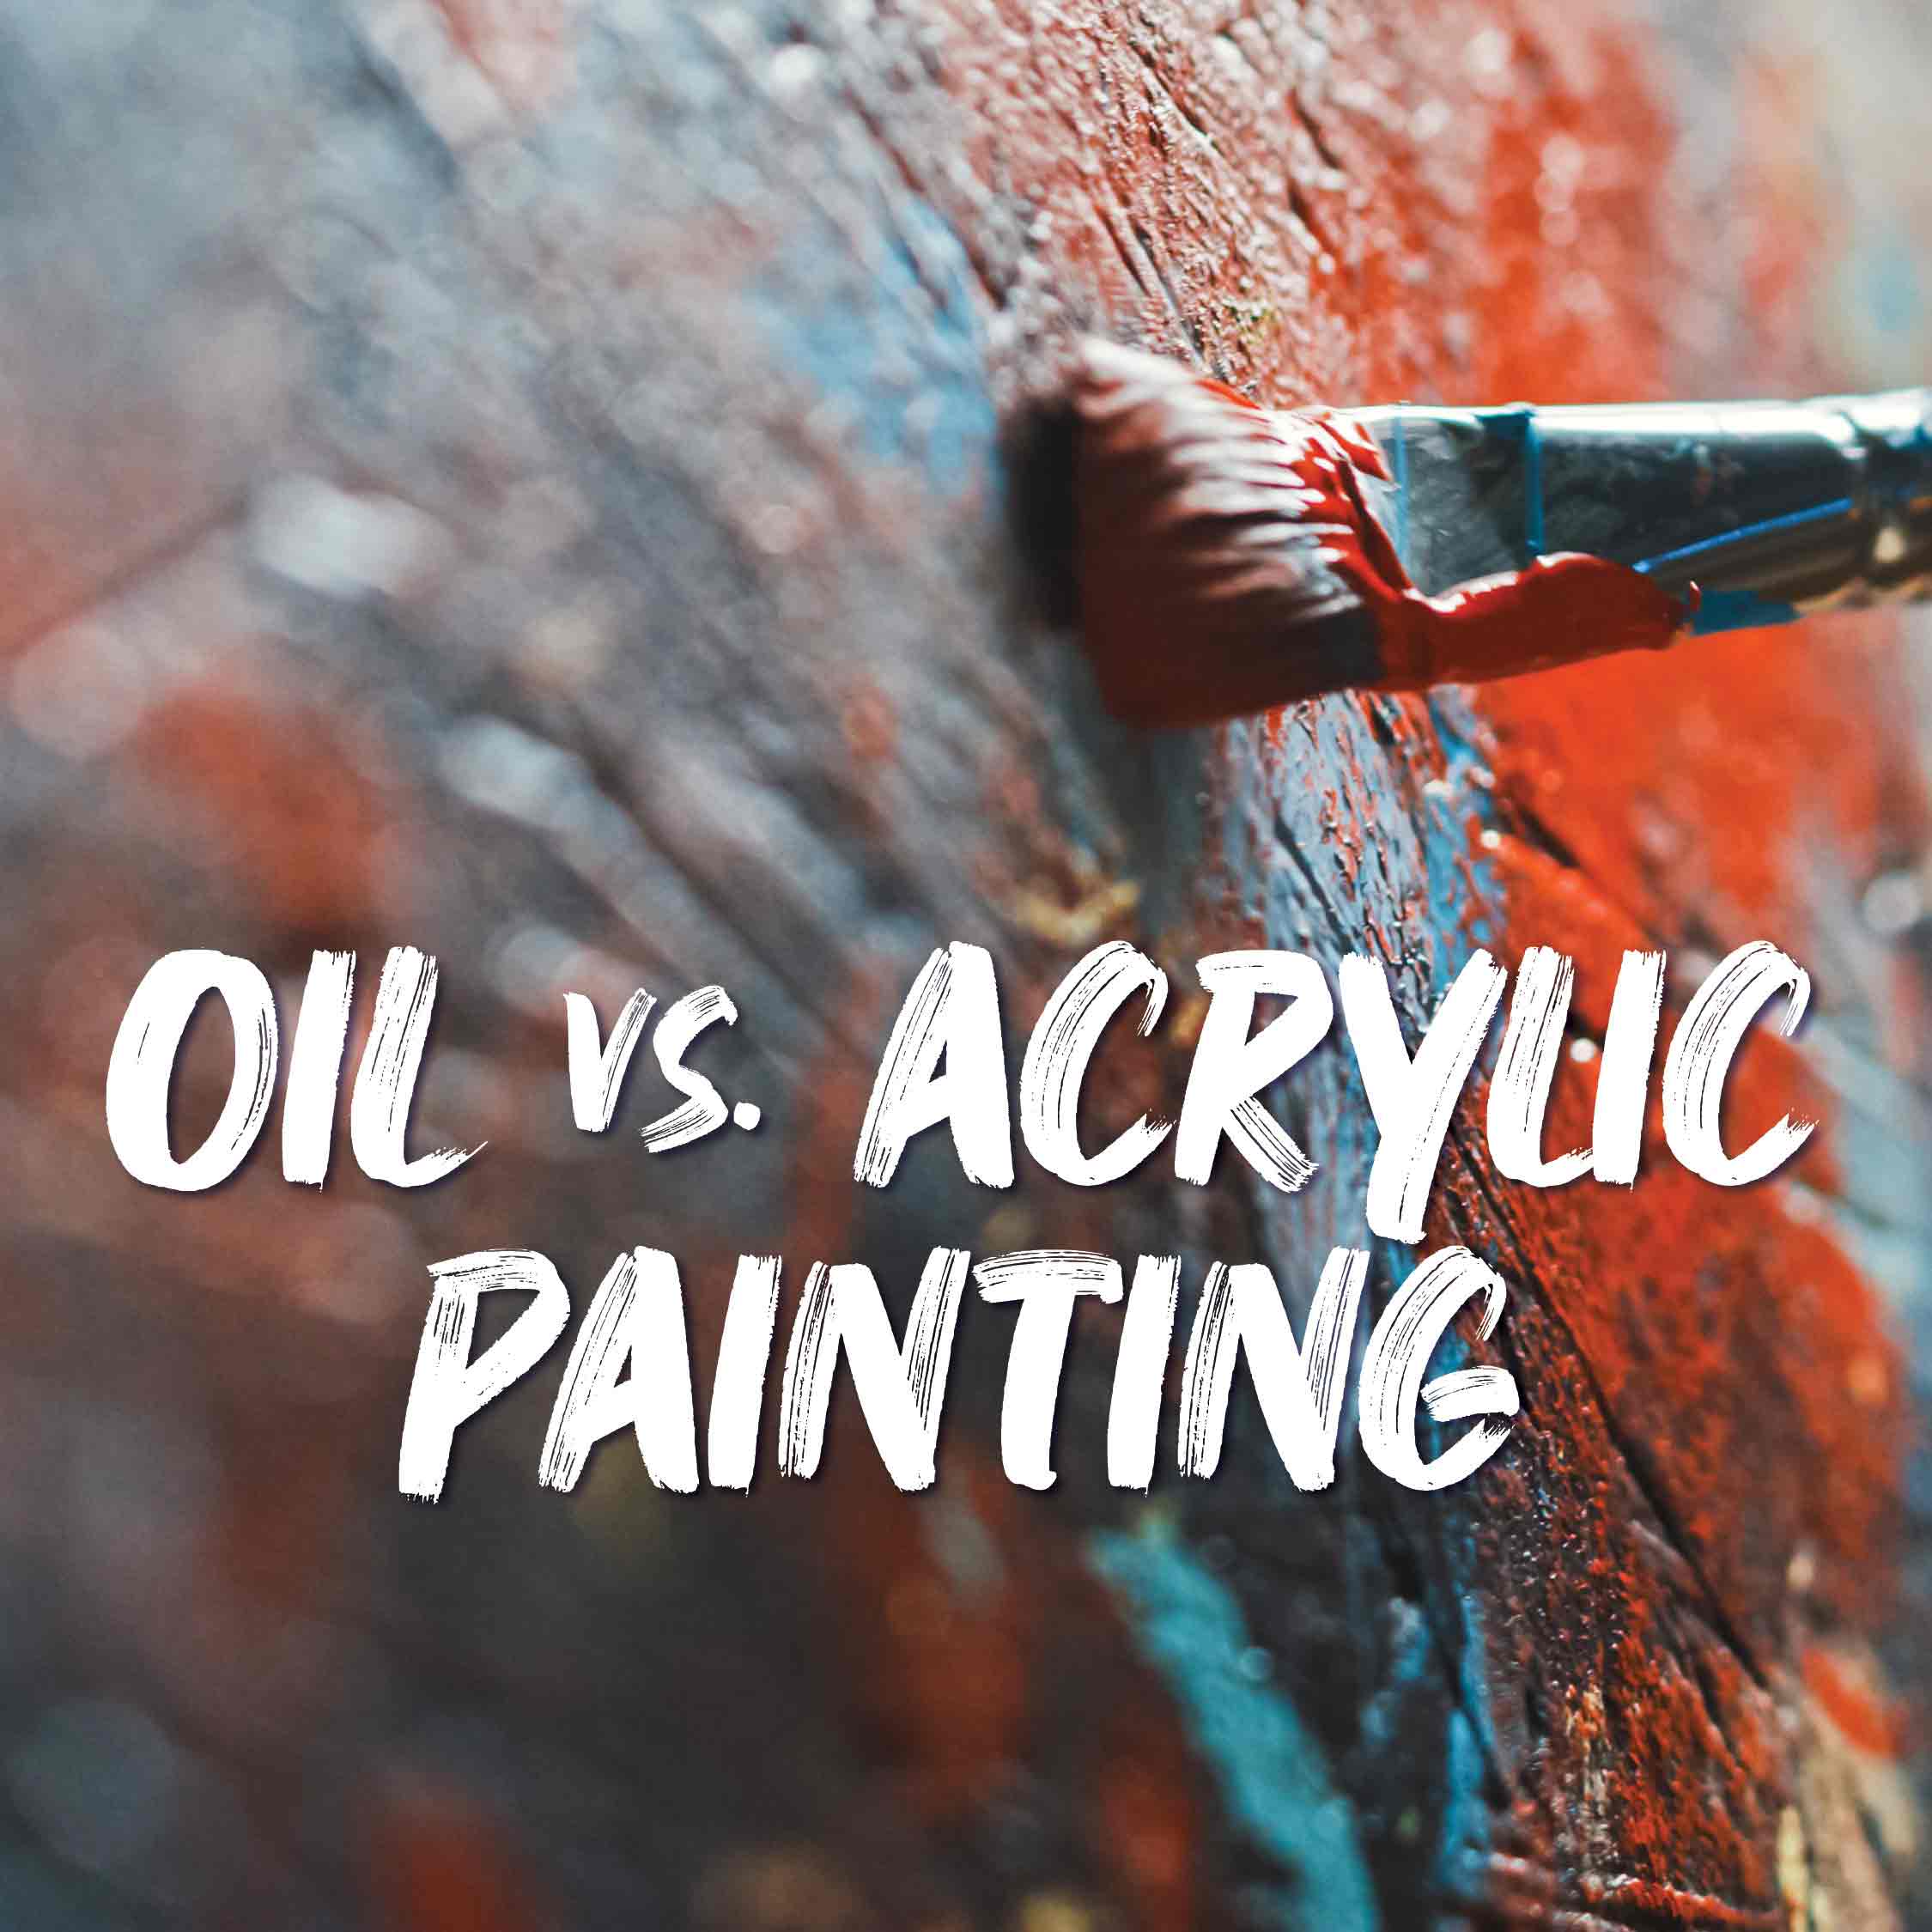 Acrylic painting or oil painting